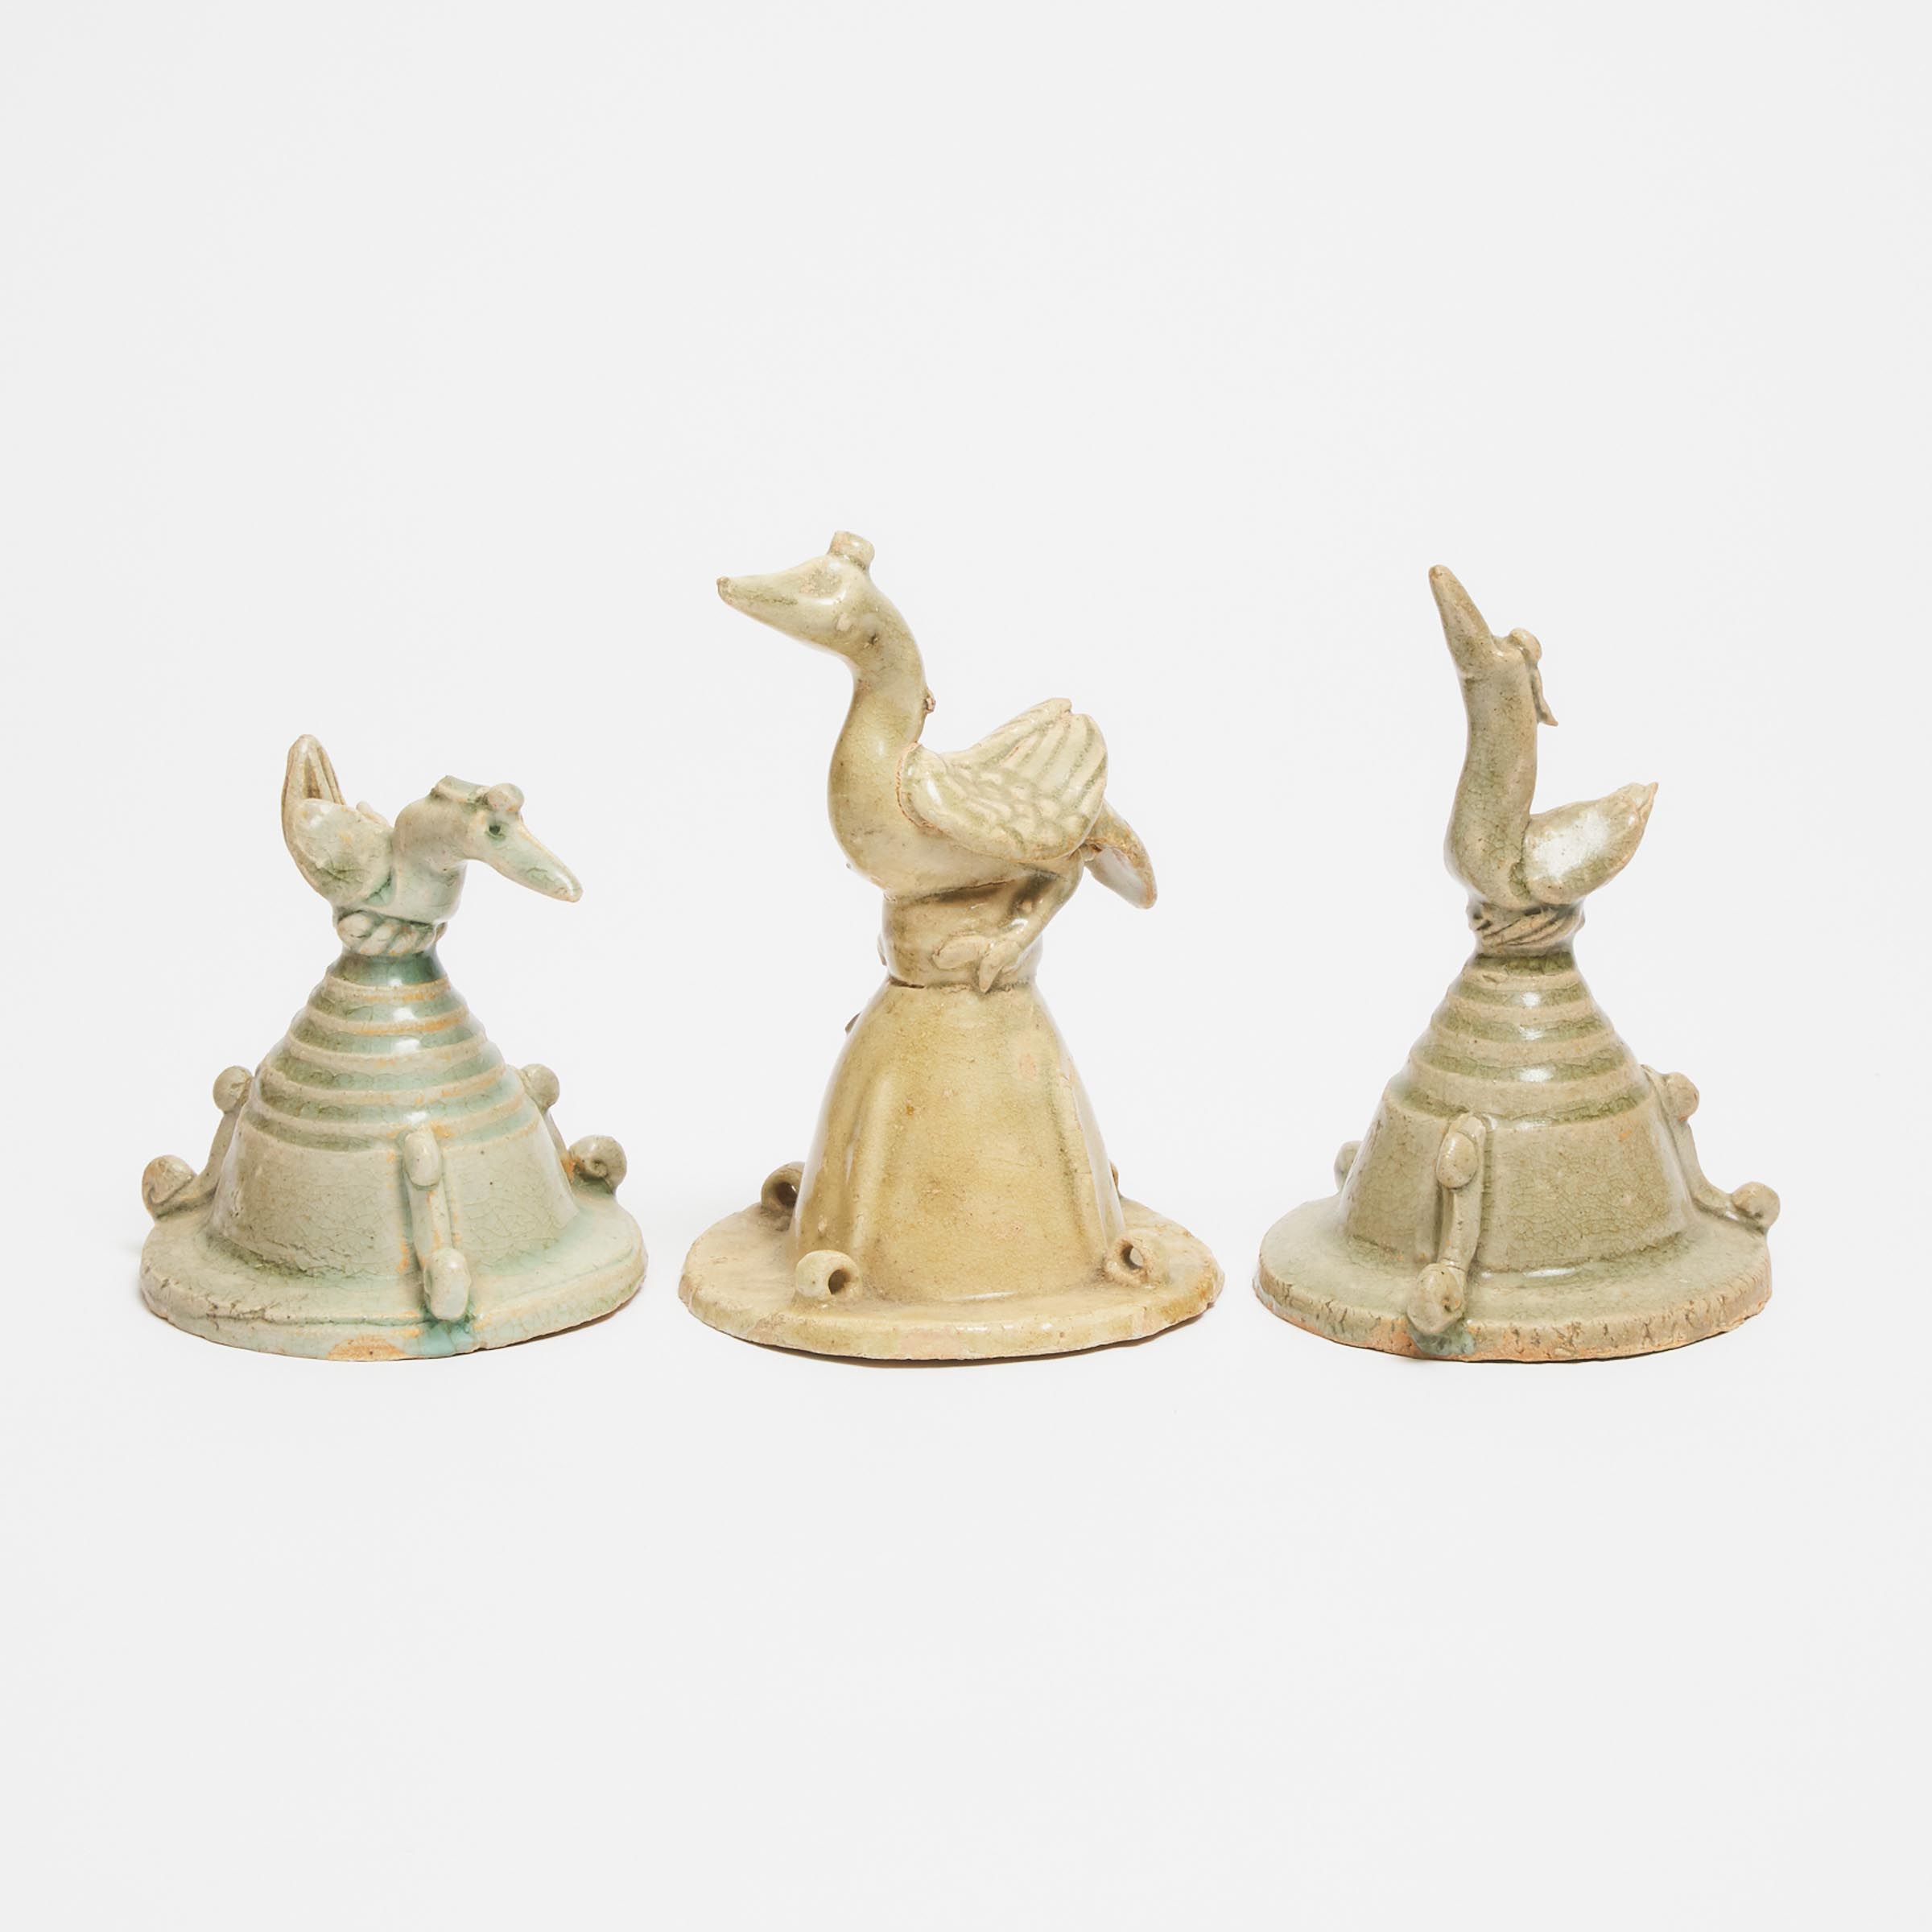 A Group of Three Straw-Glazed Pottery Funerary Covers, Song Dynasty (AD 960-1279)